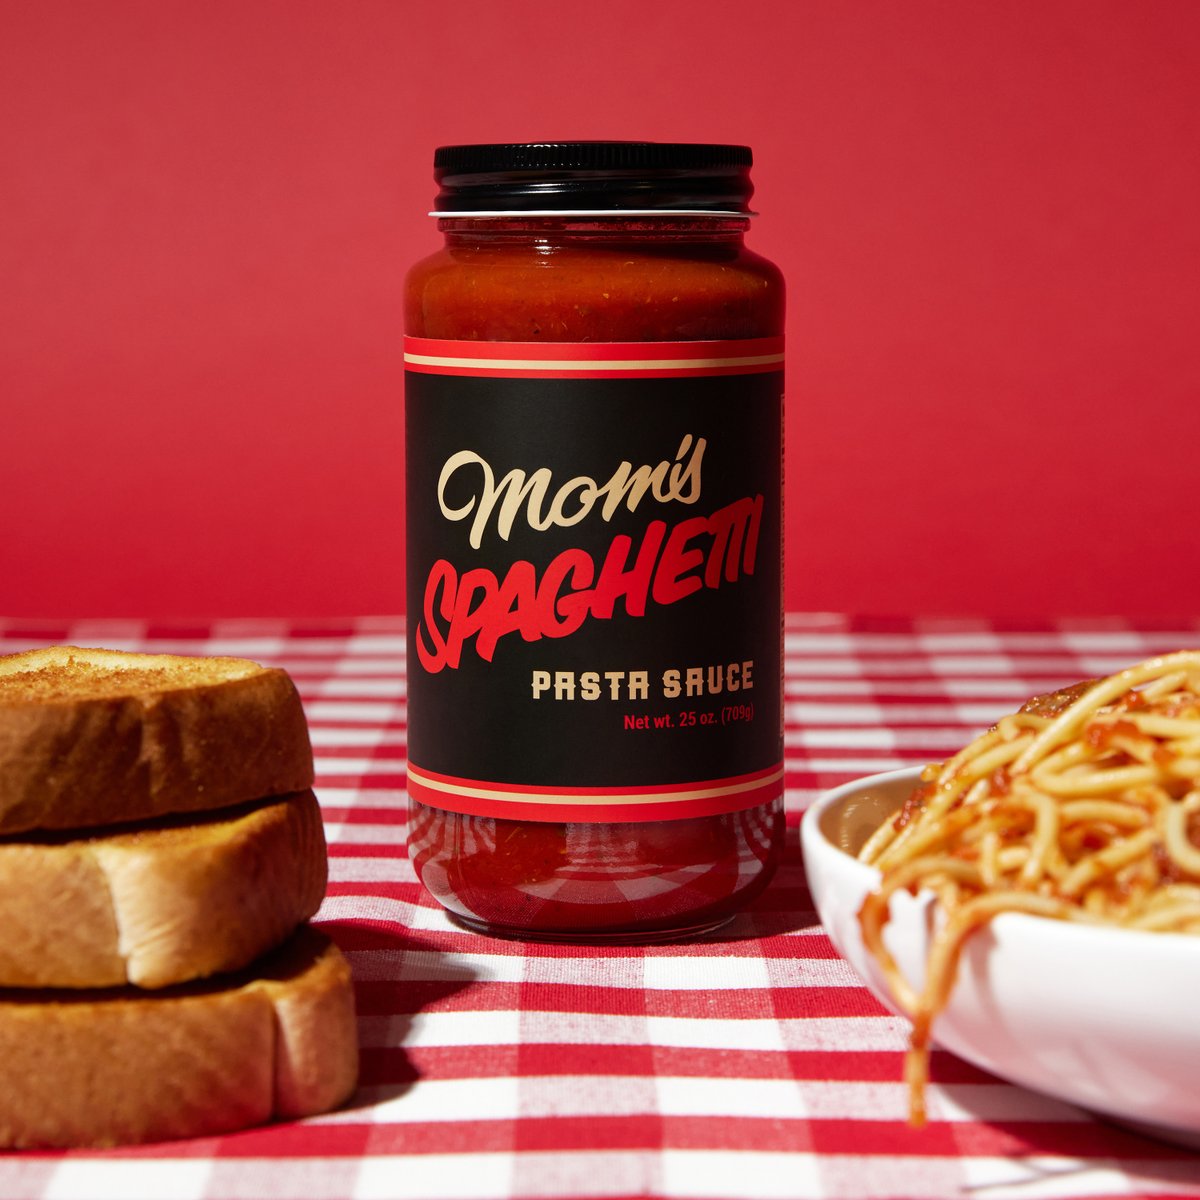 Time is running out to bring the D to your kitchen 🍝 grab yourself some #MomsSpaghetti pasta sauce before it’s gone! Momsspaghetti.com